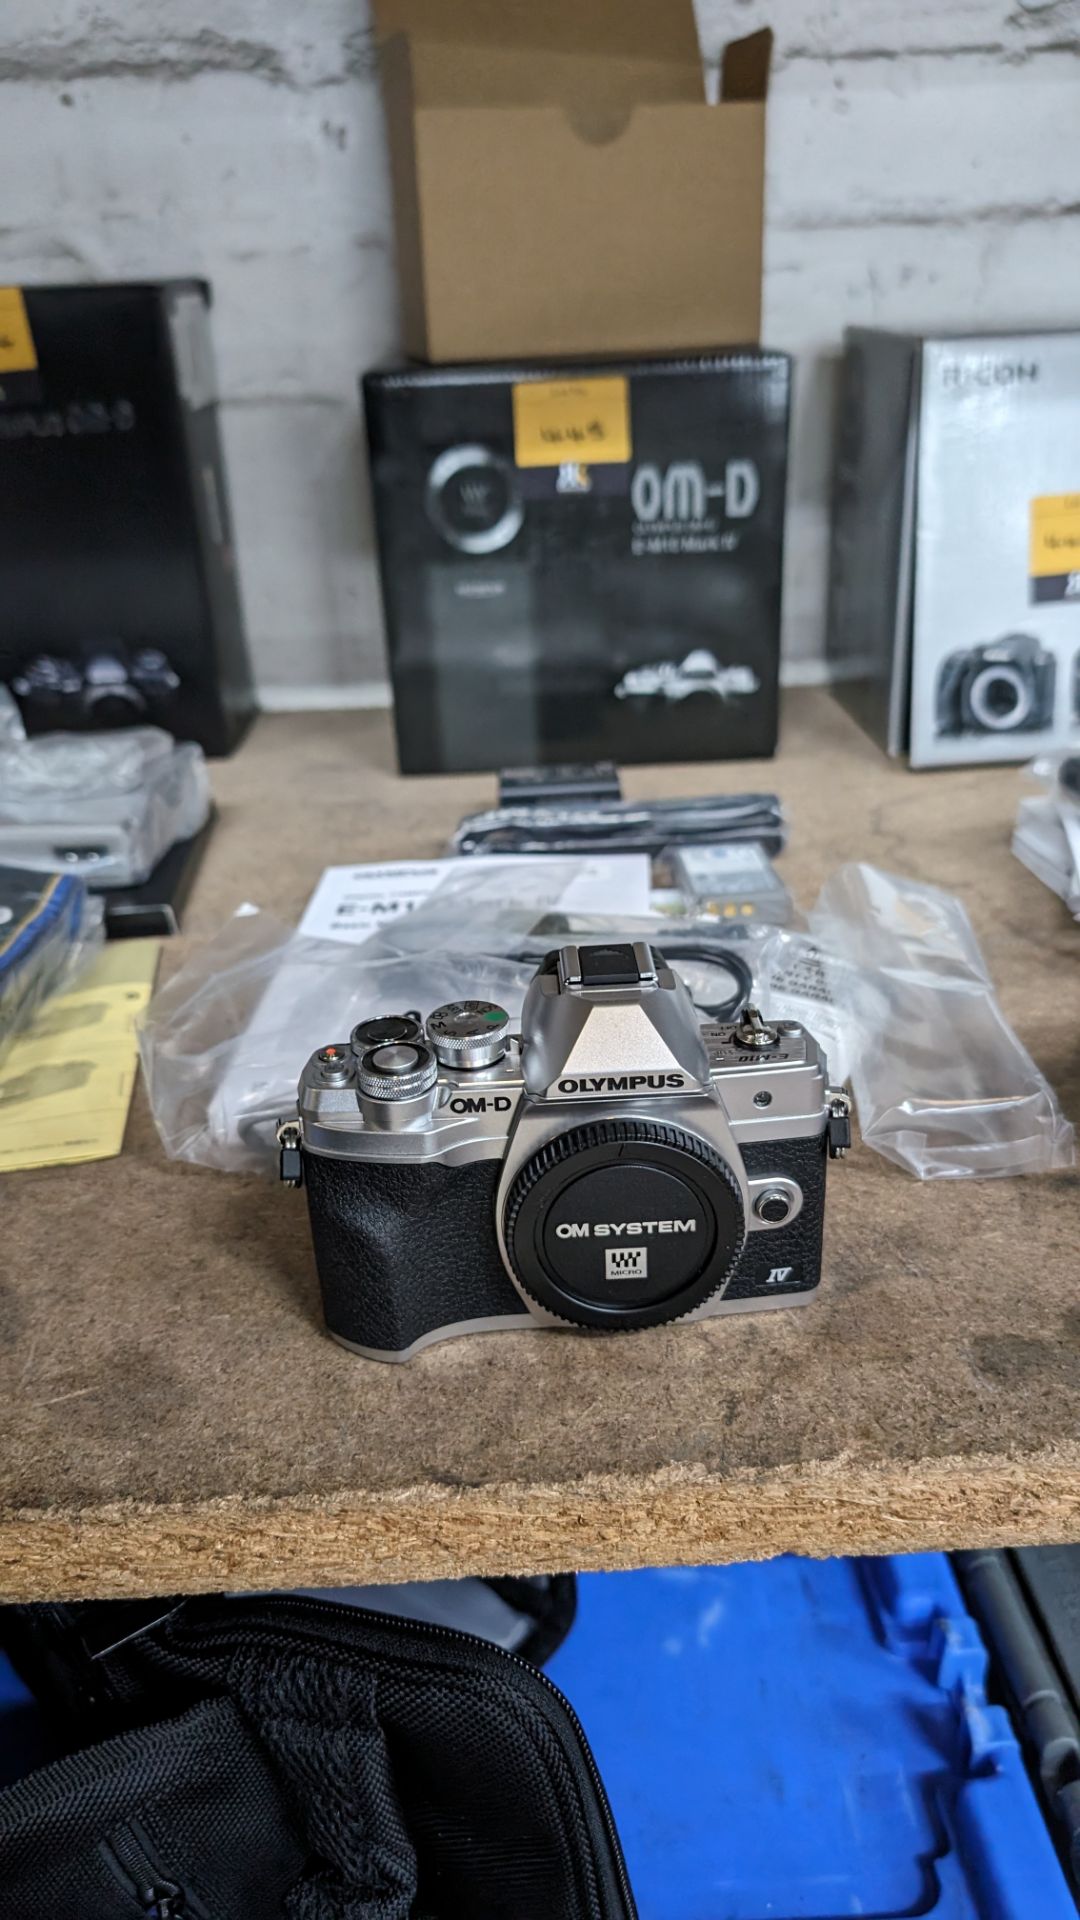 Olympus OM-D E-M10 Mark IV camera, in box, including strap, battery, adaptor and cable